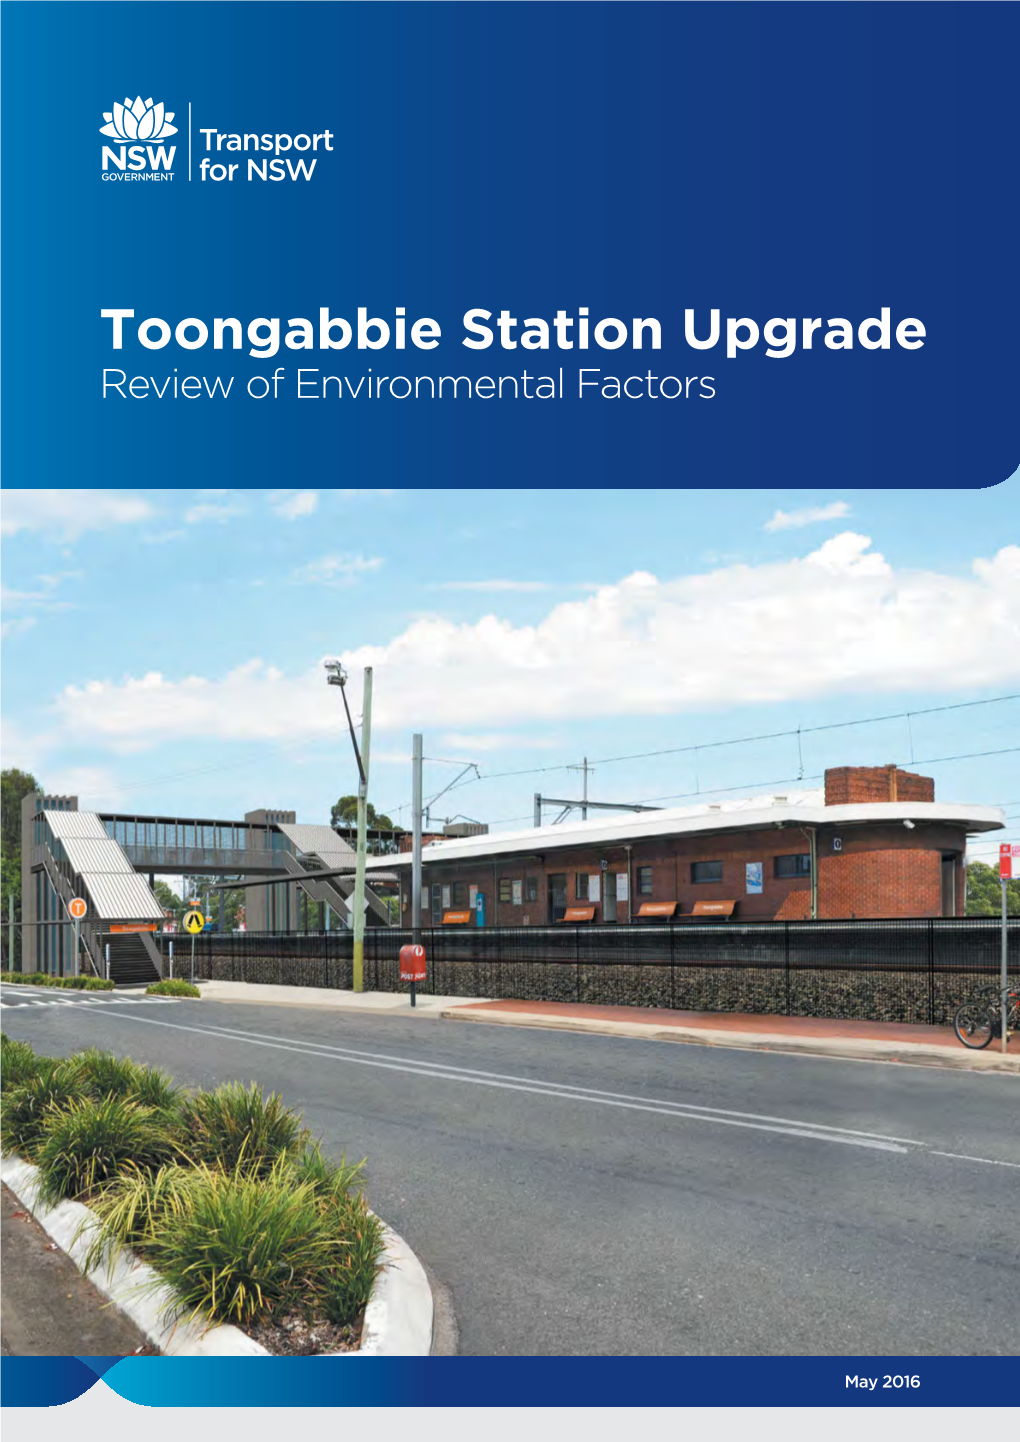 Toongabbie Station Upgrade Review of Environmental Factors